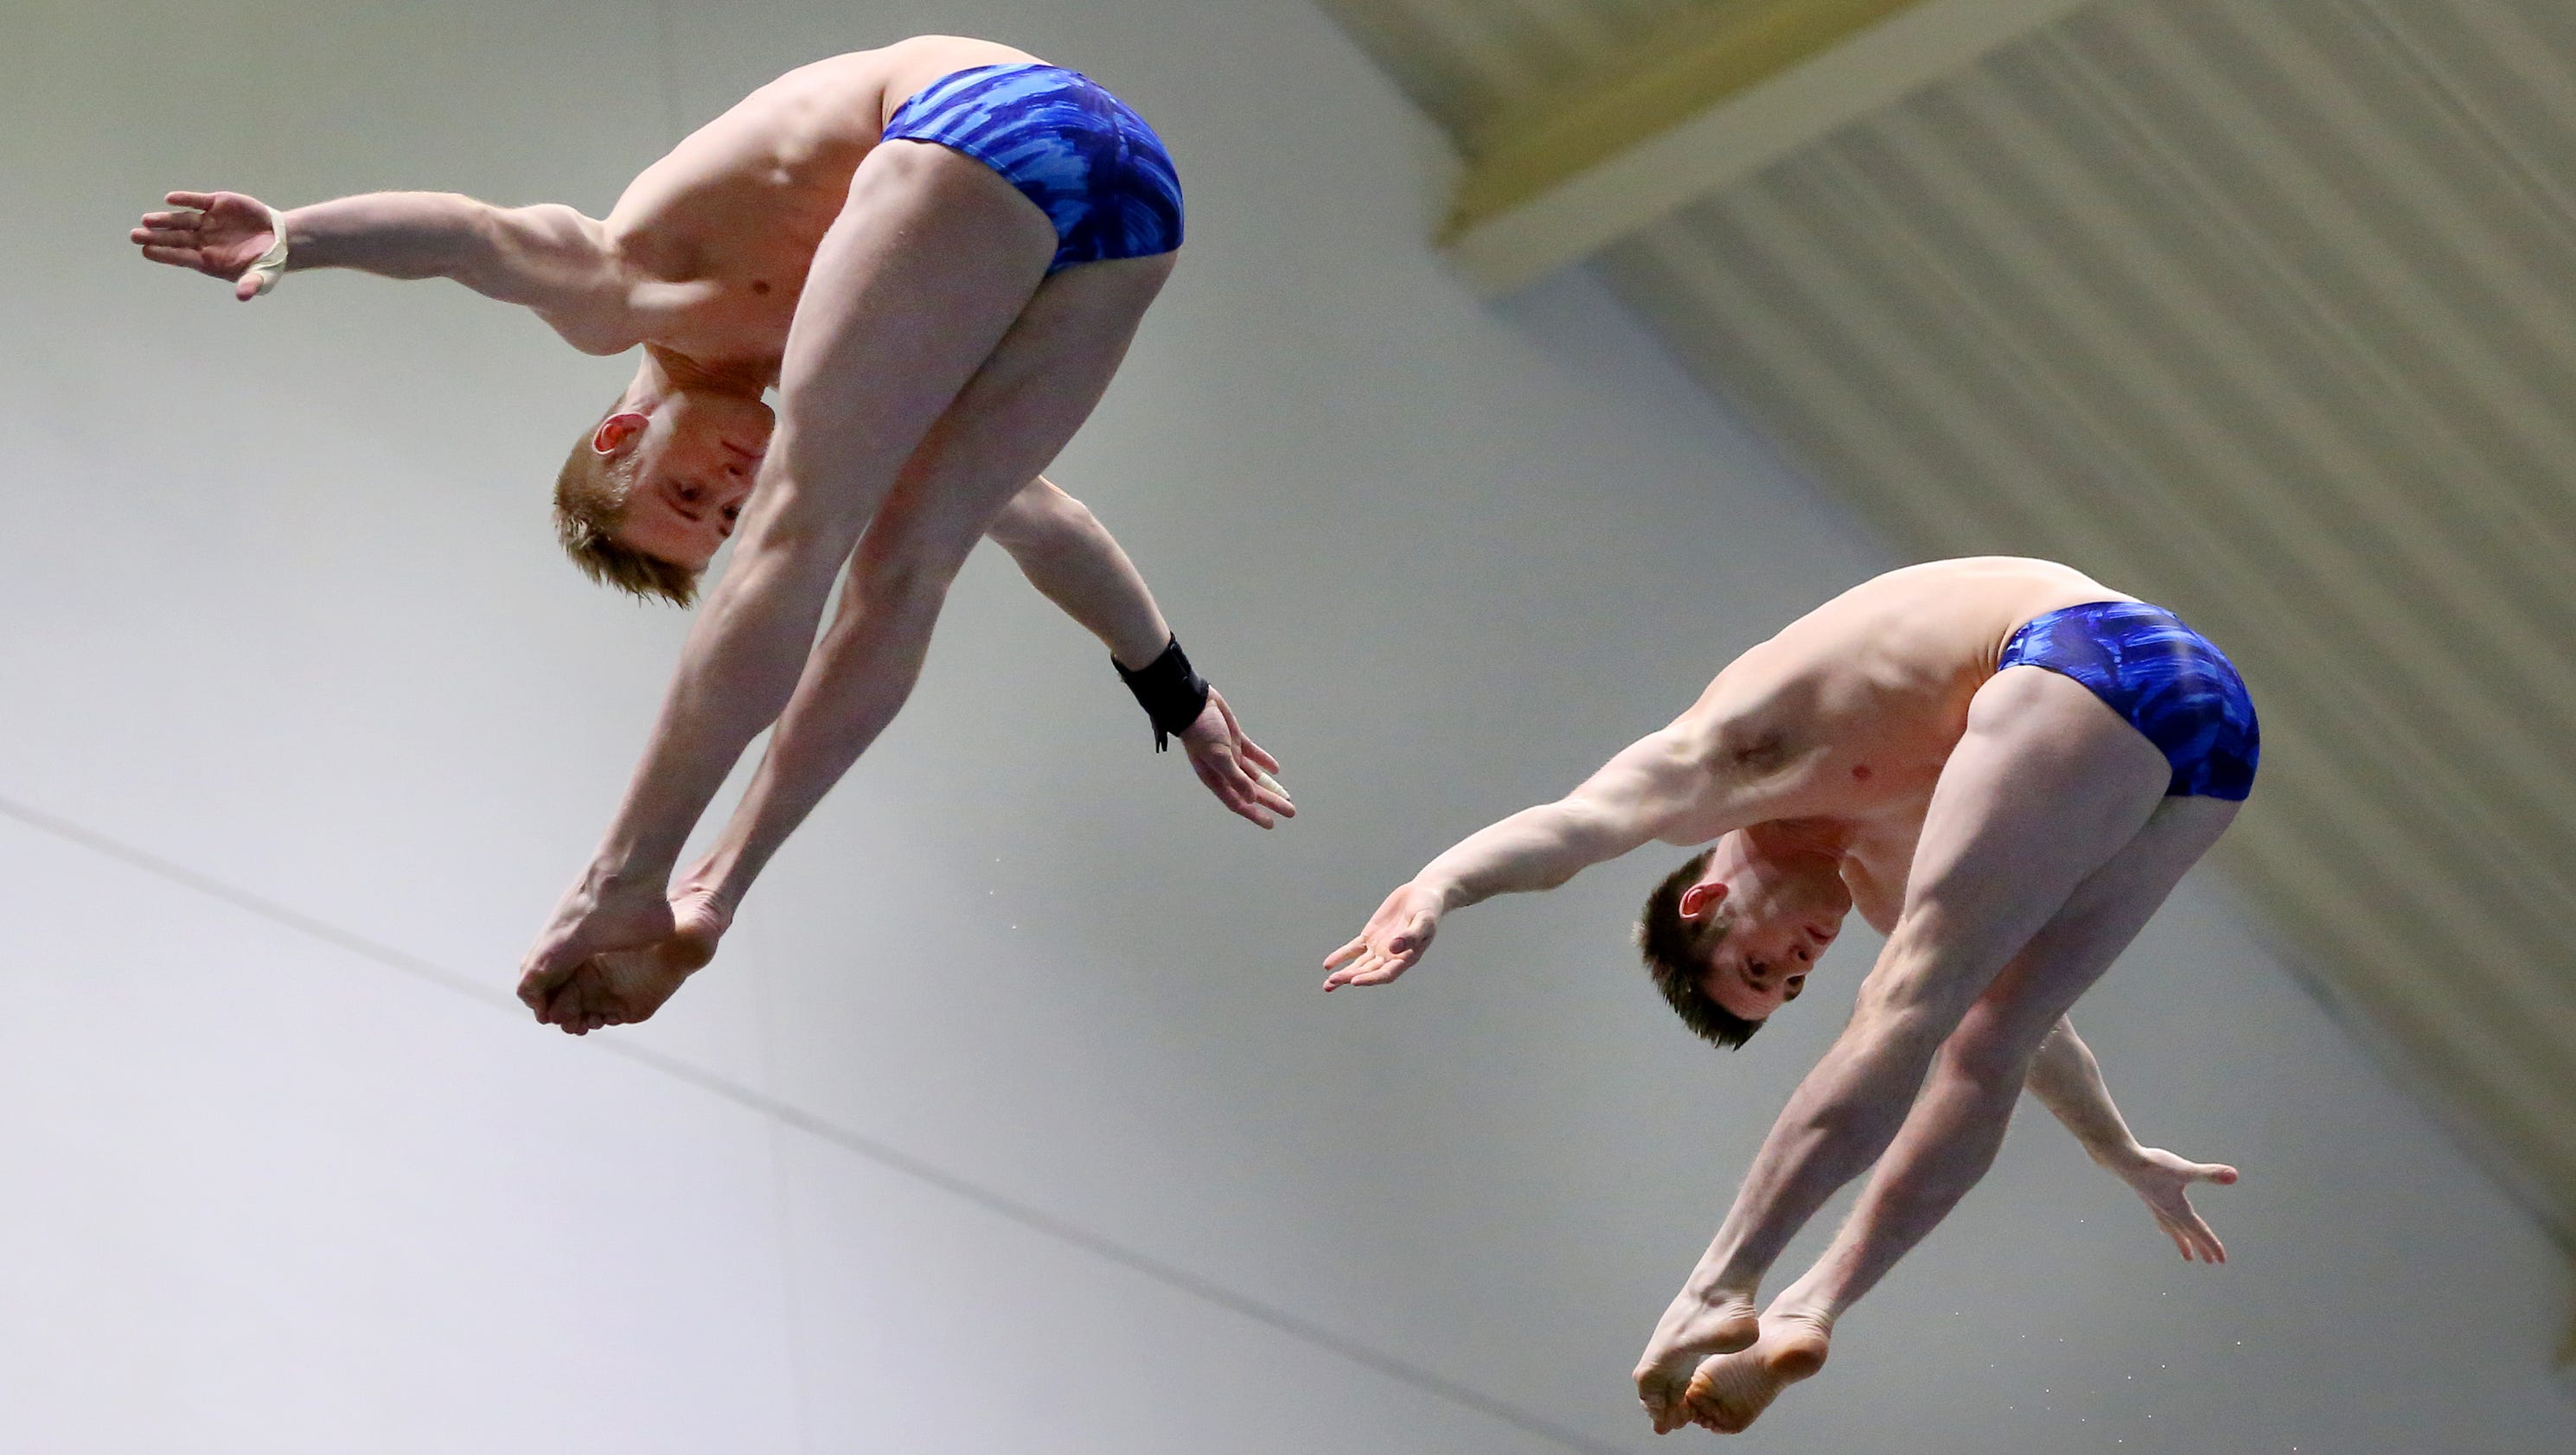 Five things to watch in U.S. Olympic diving trials